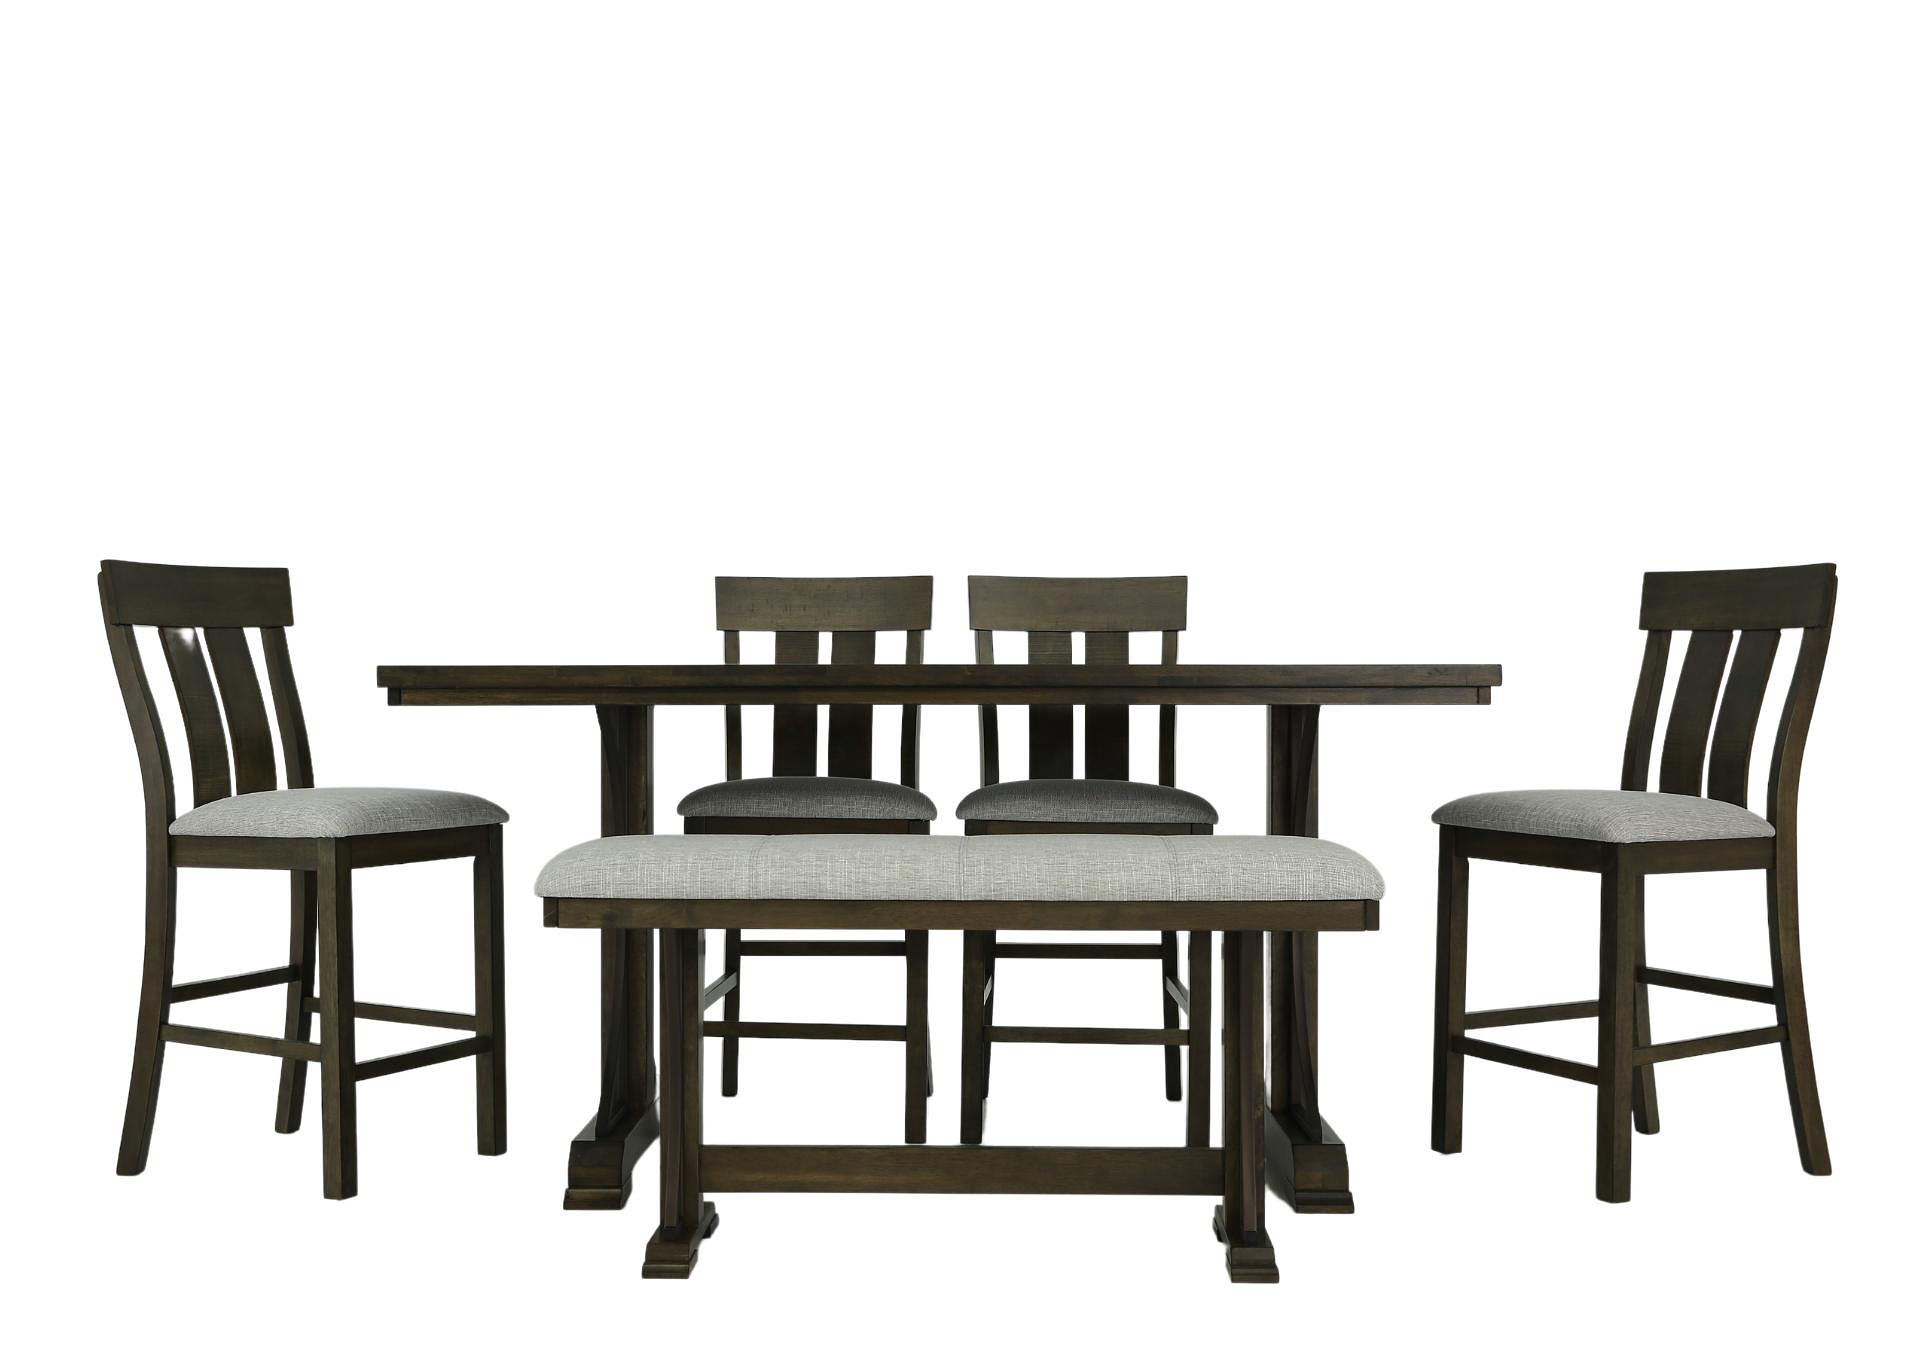 QUINCY 6 PIECE COUNTER HEIGHT TABLE SET